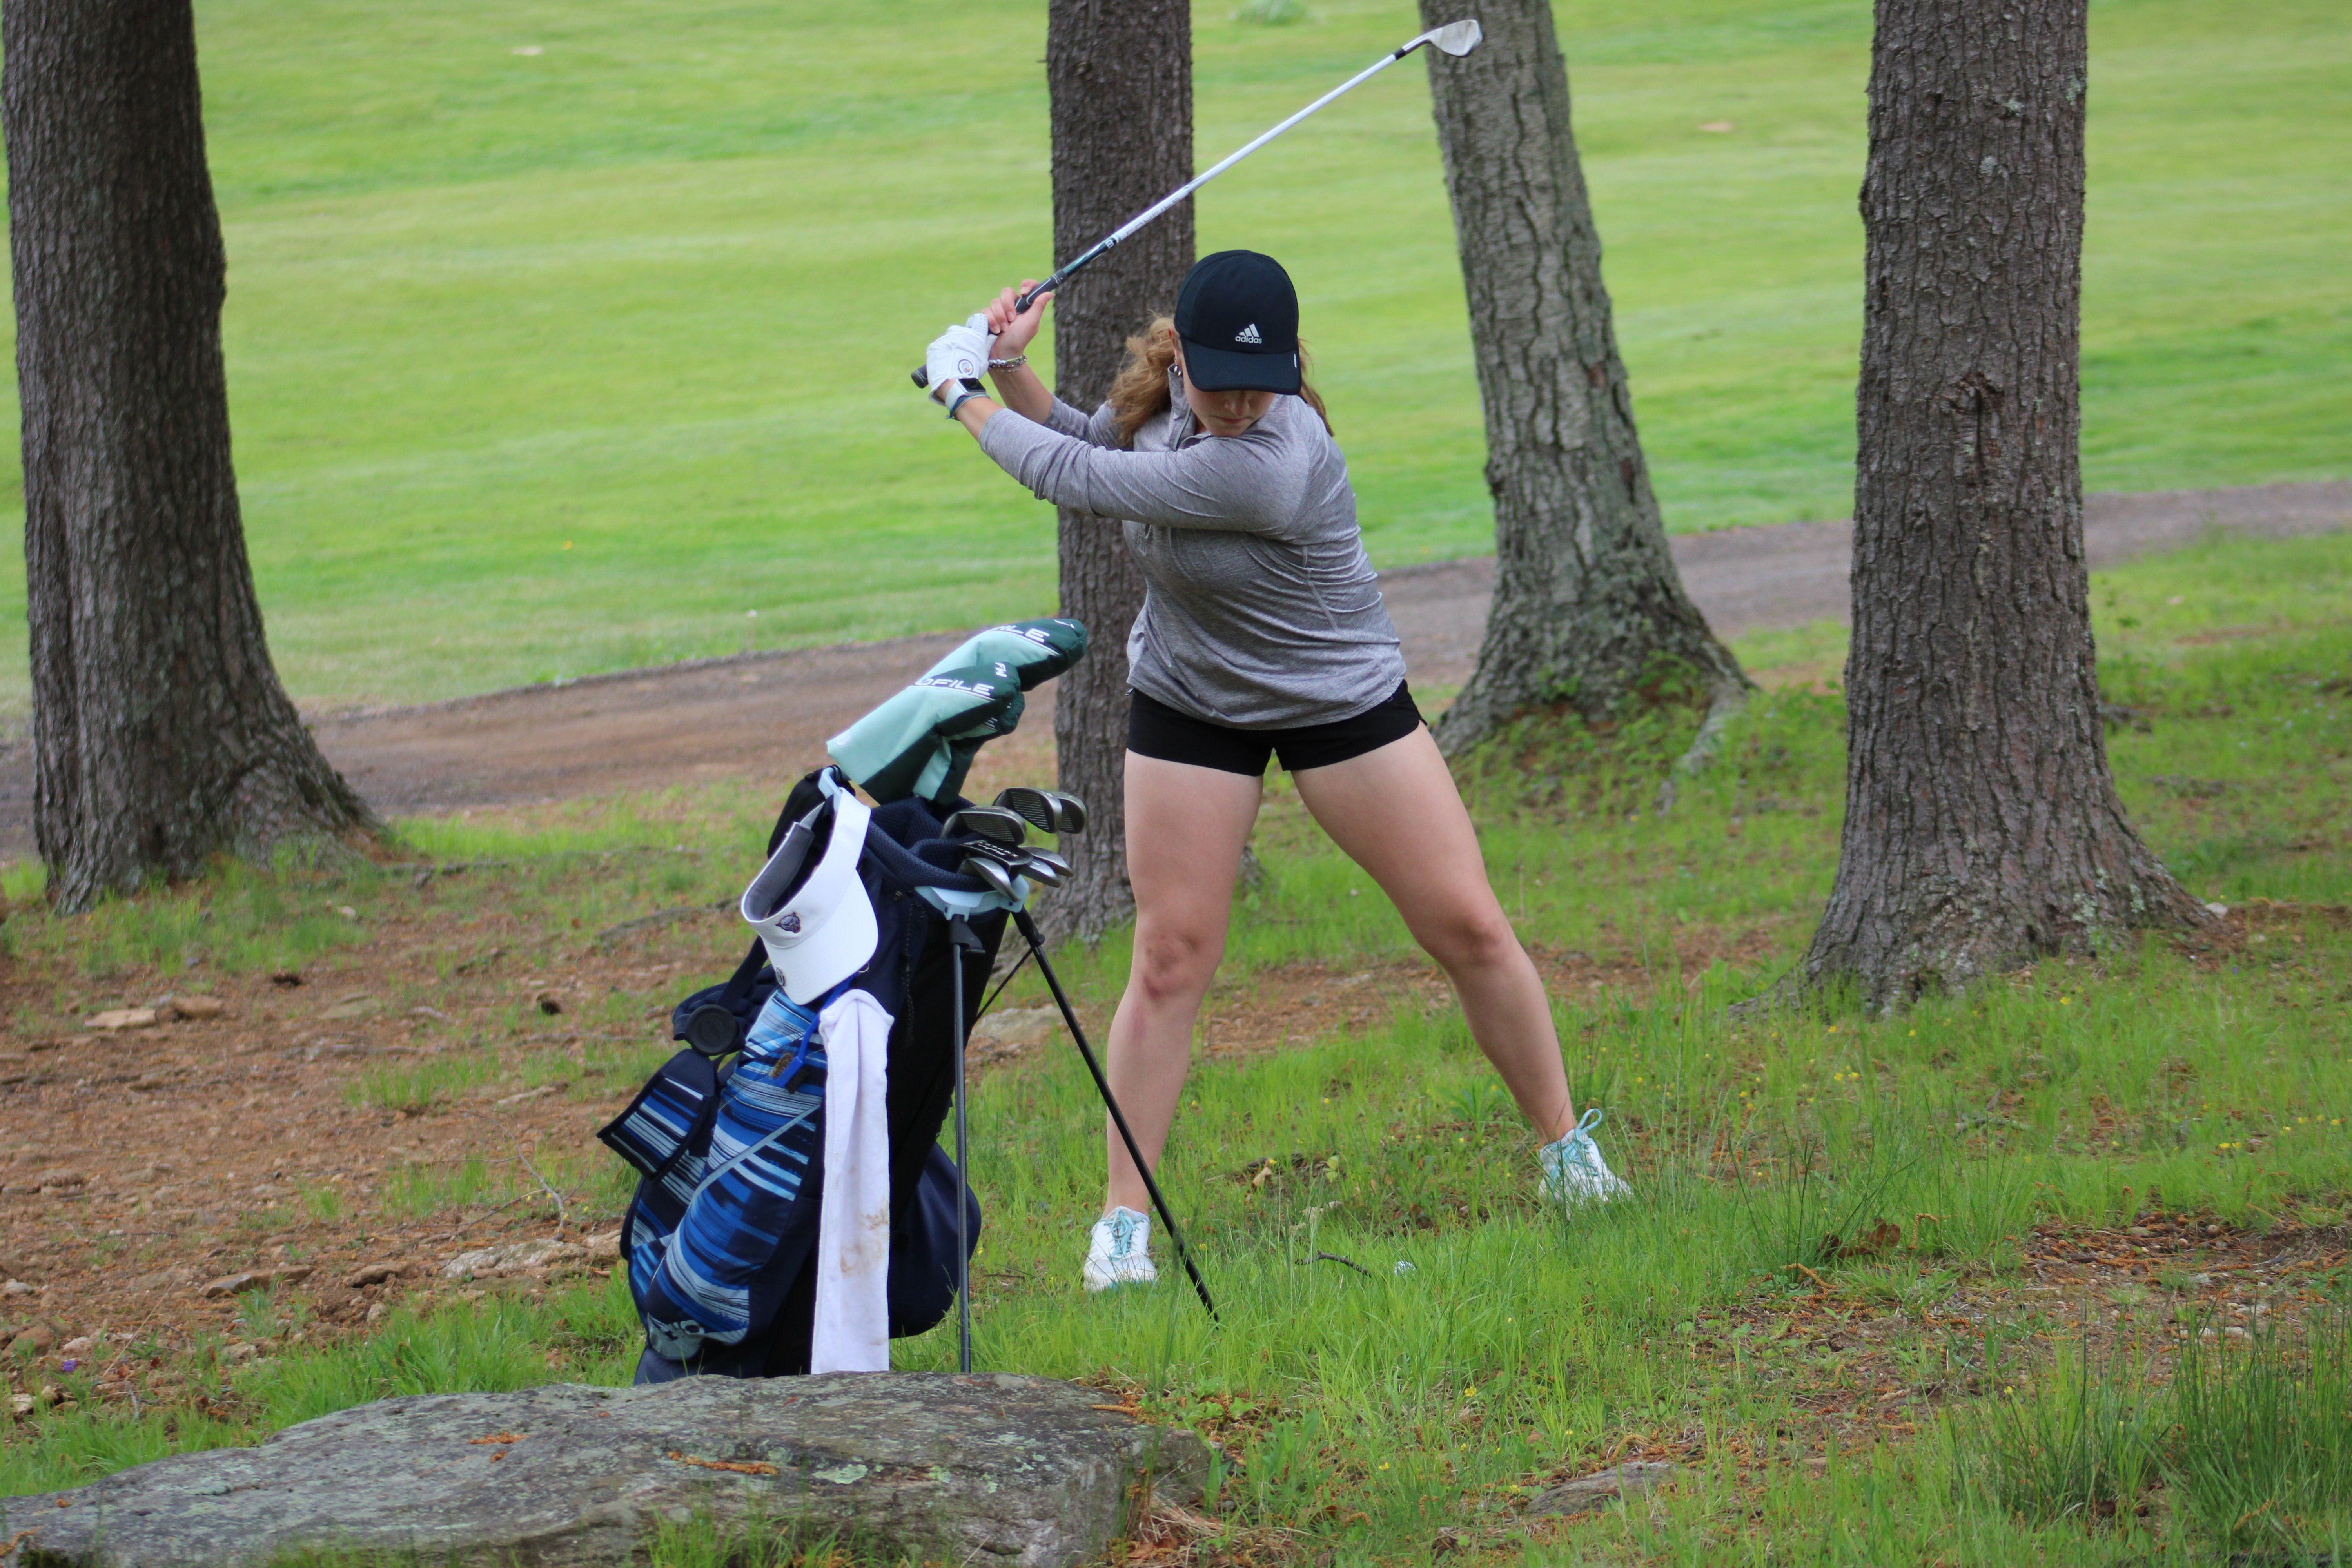 Lone senior leads Quabbin's golf team, earns Golfer of Year honor for contributions